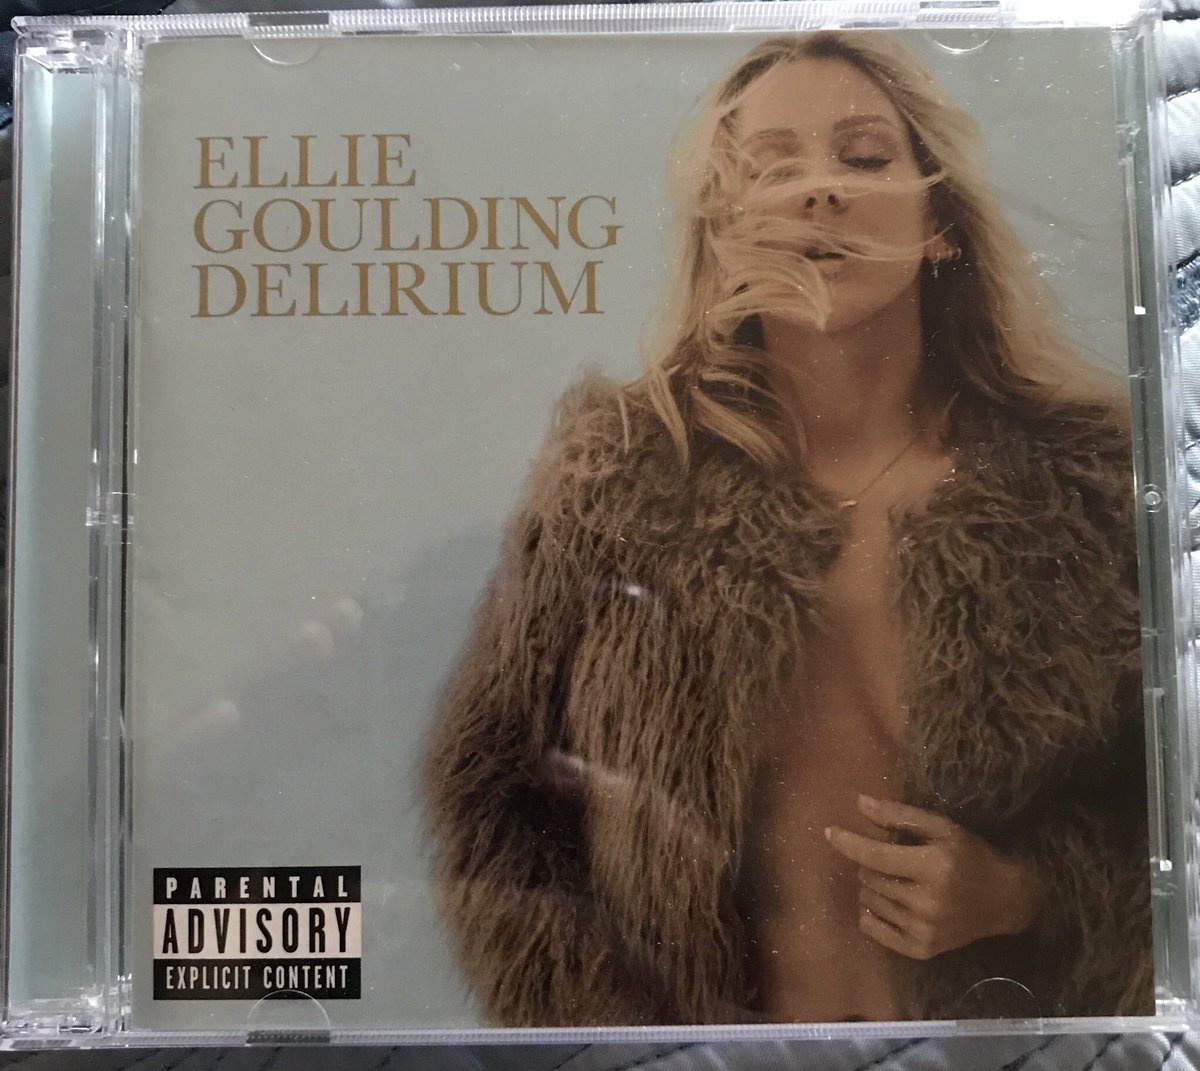 #2: Delirium by Ellie Goulding. I remember getting this album as a gift as well. This one was a surprise but I love this album so much because I really like Ellie Goulding’s voice 